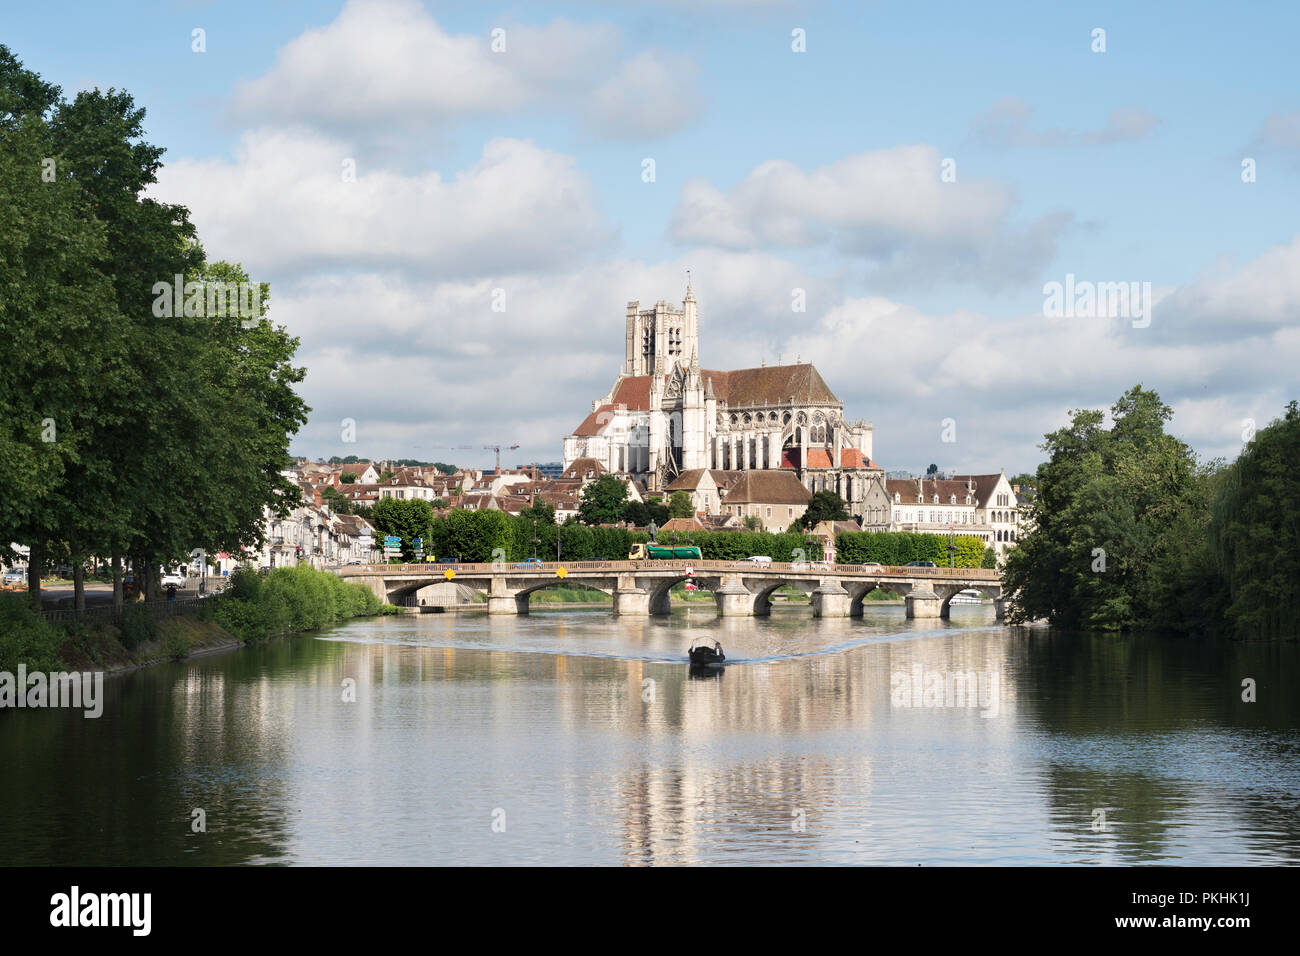 Cathedral Saint-Étienne (St. Stephen)  reflected in the river Yonne, Auxerre, Burgundy, France, Europe Stock Photo